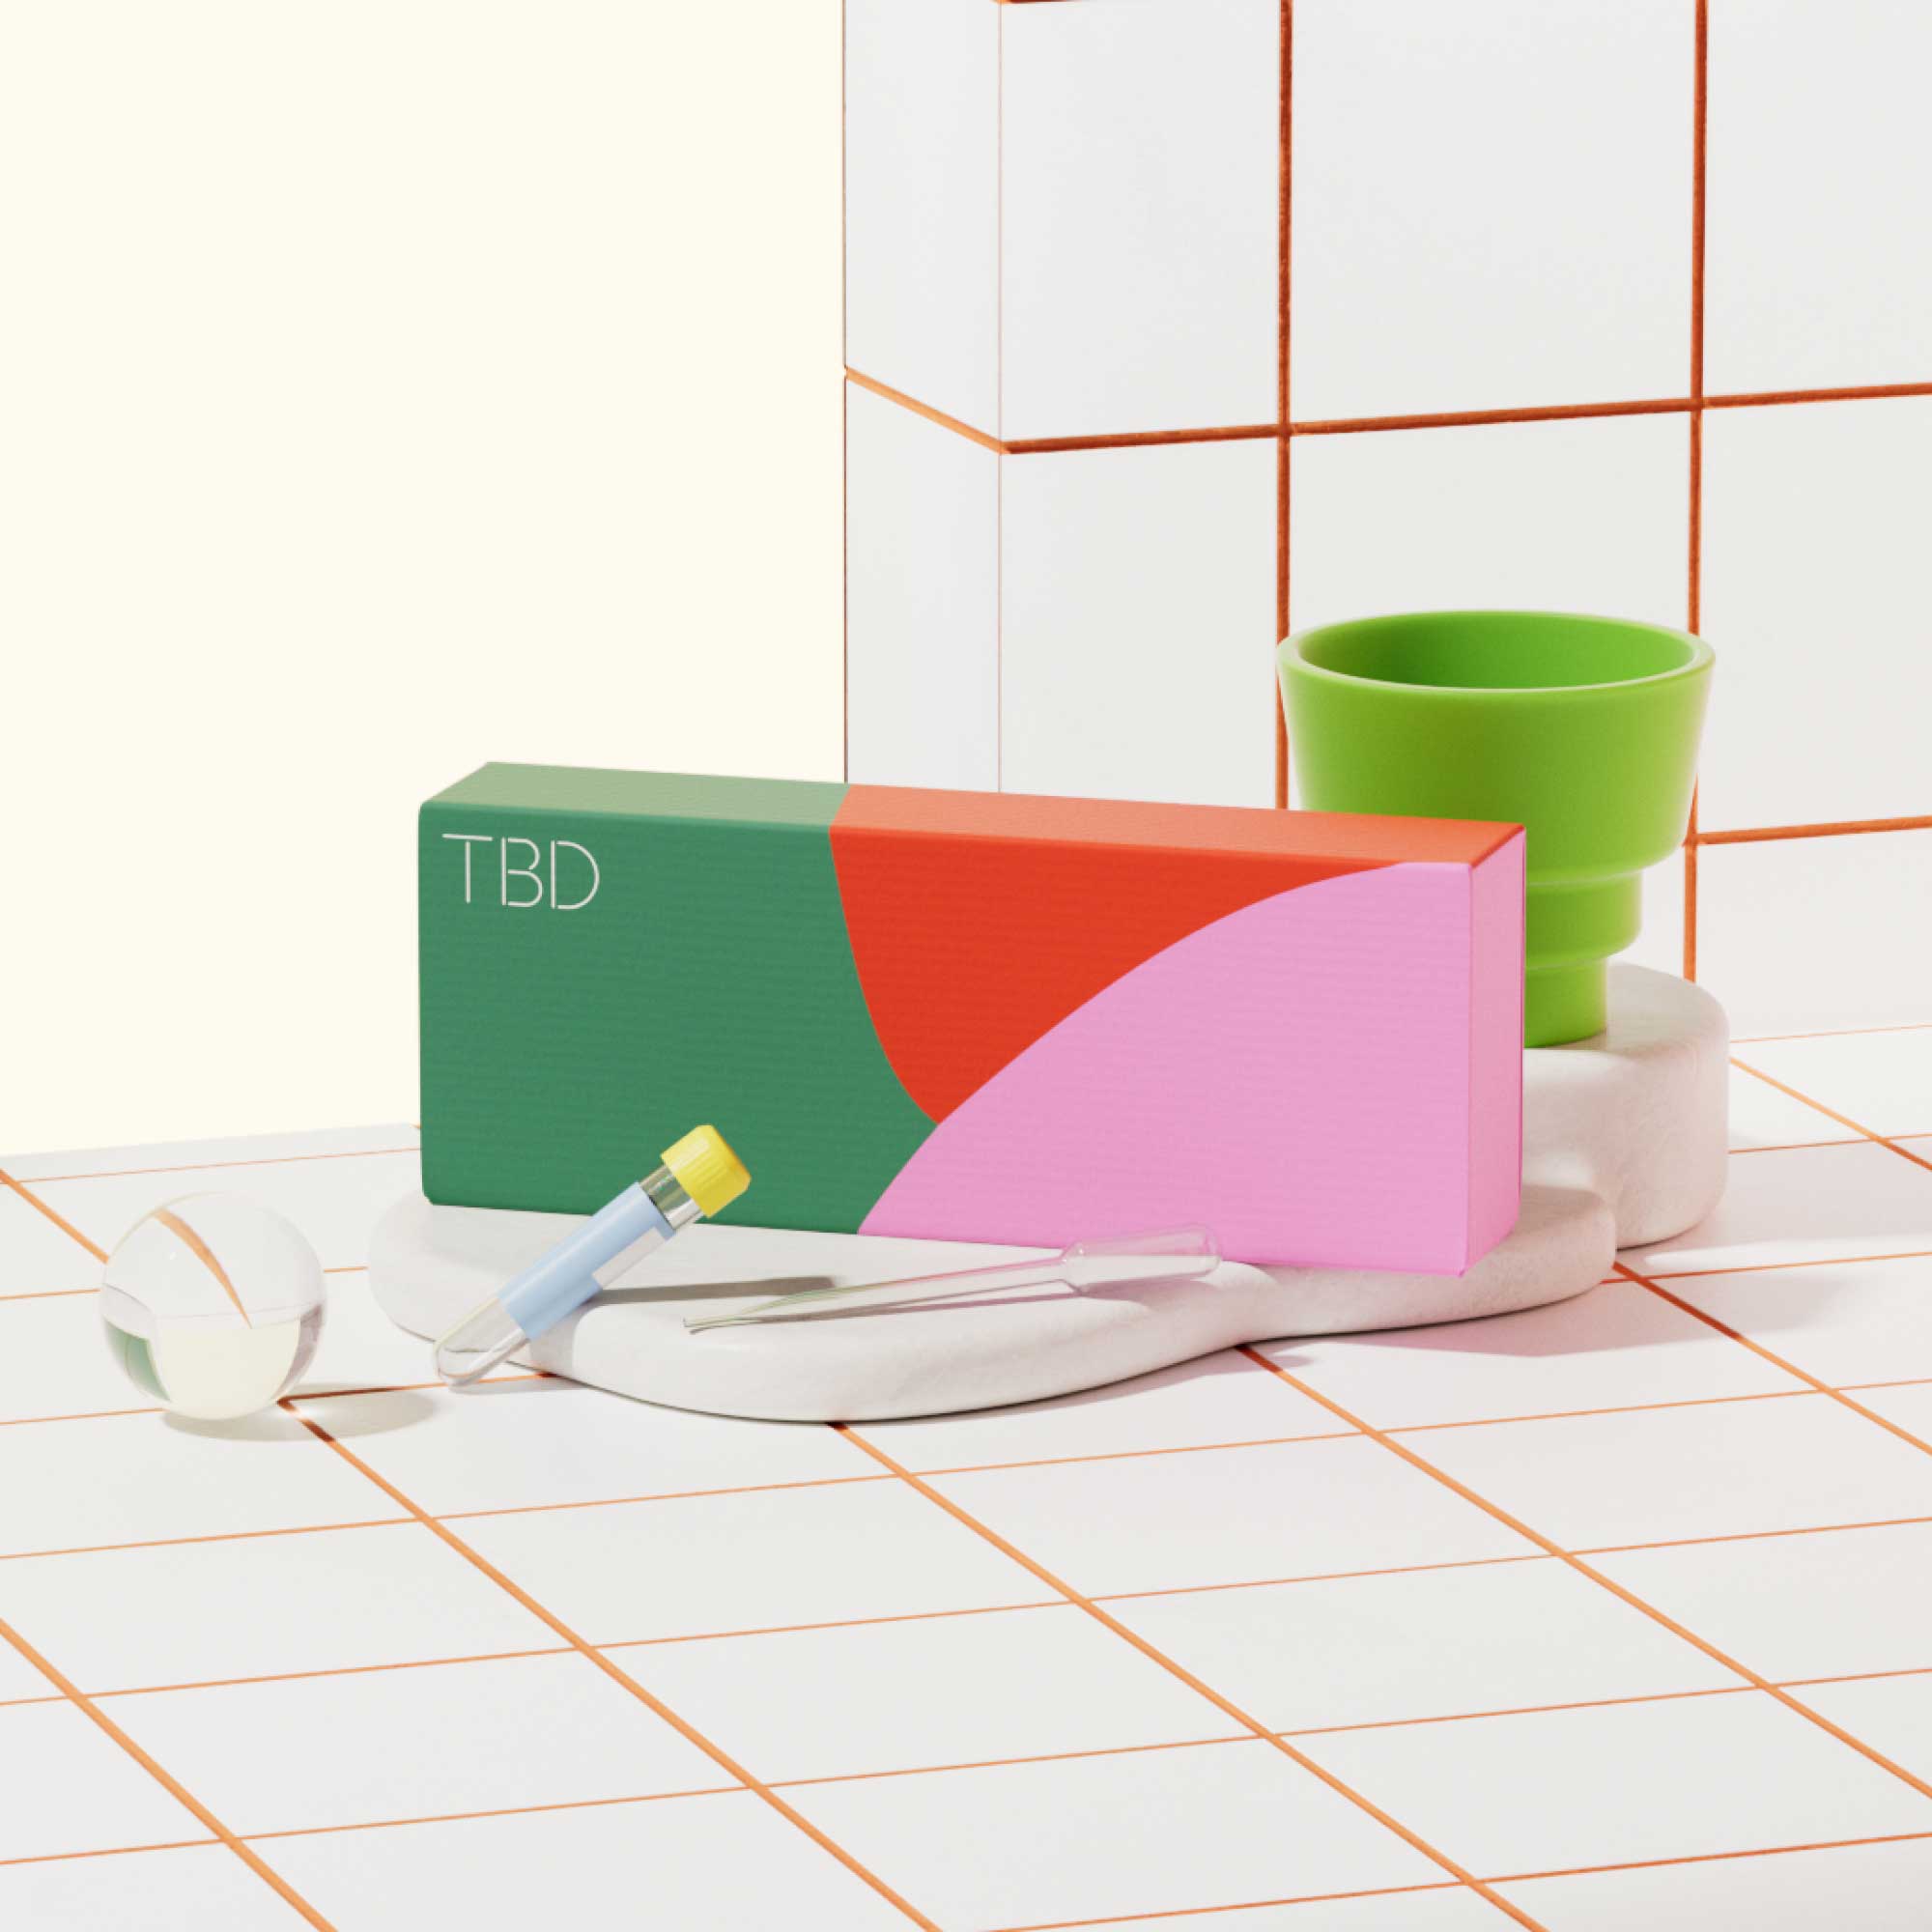 A colorful TBD Health shipping box with test tubes and vials on organic-shaped ceramic blocks on a red and white tiled surface